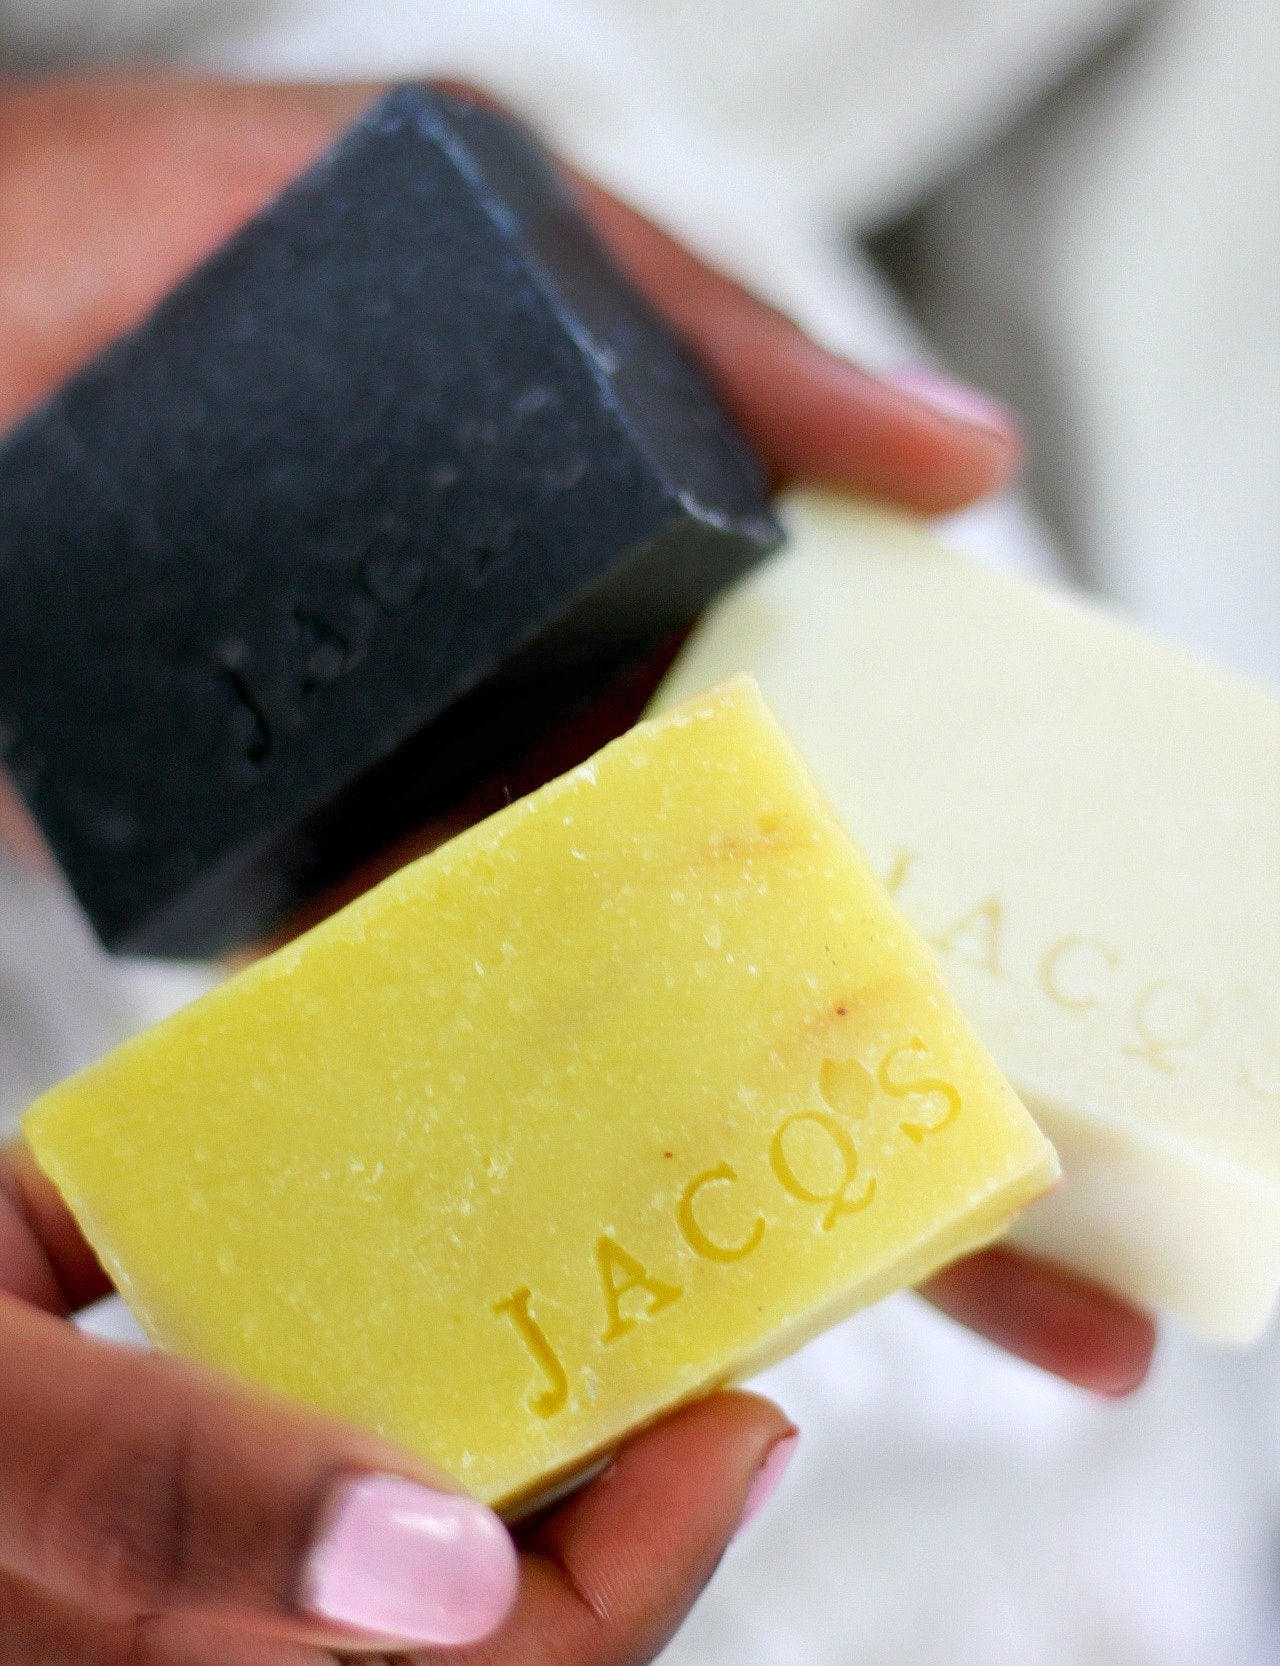 Black woman holding 2 JACQ's beauty bars, charcoal, and beige